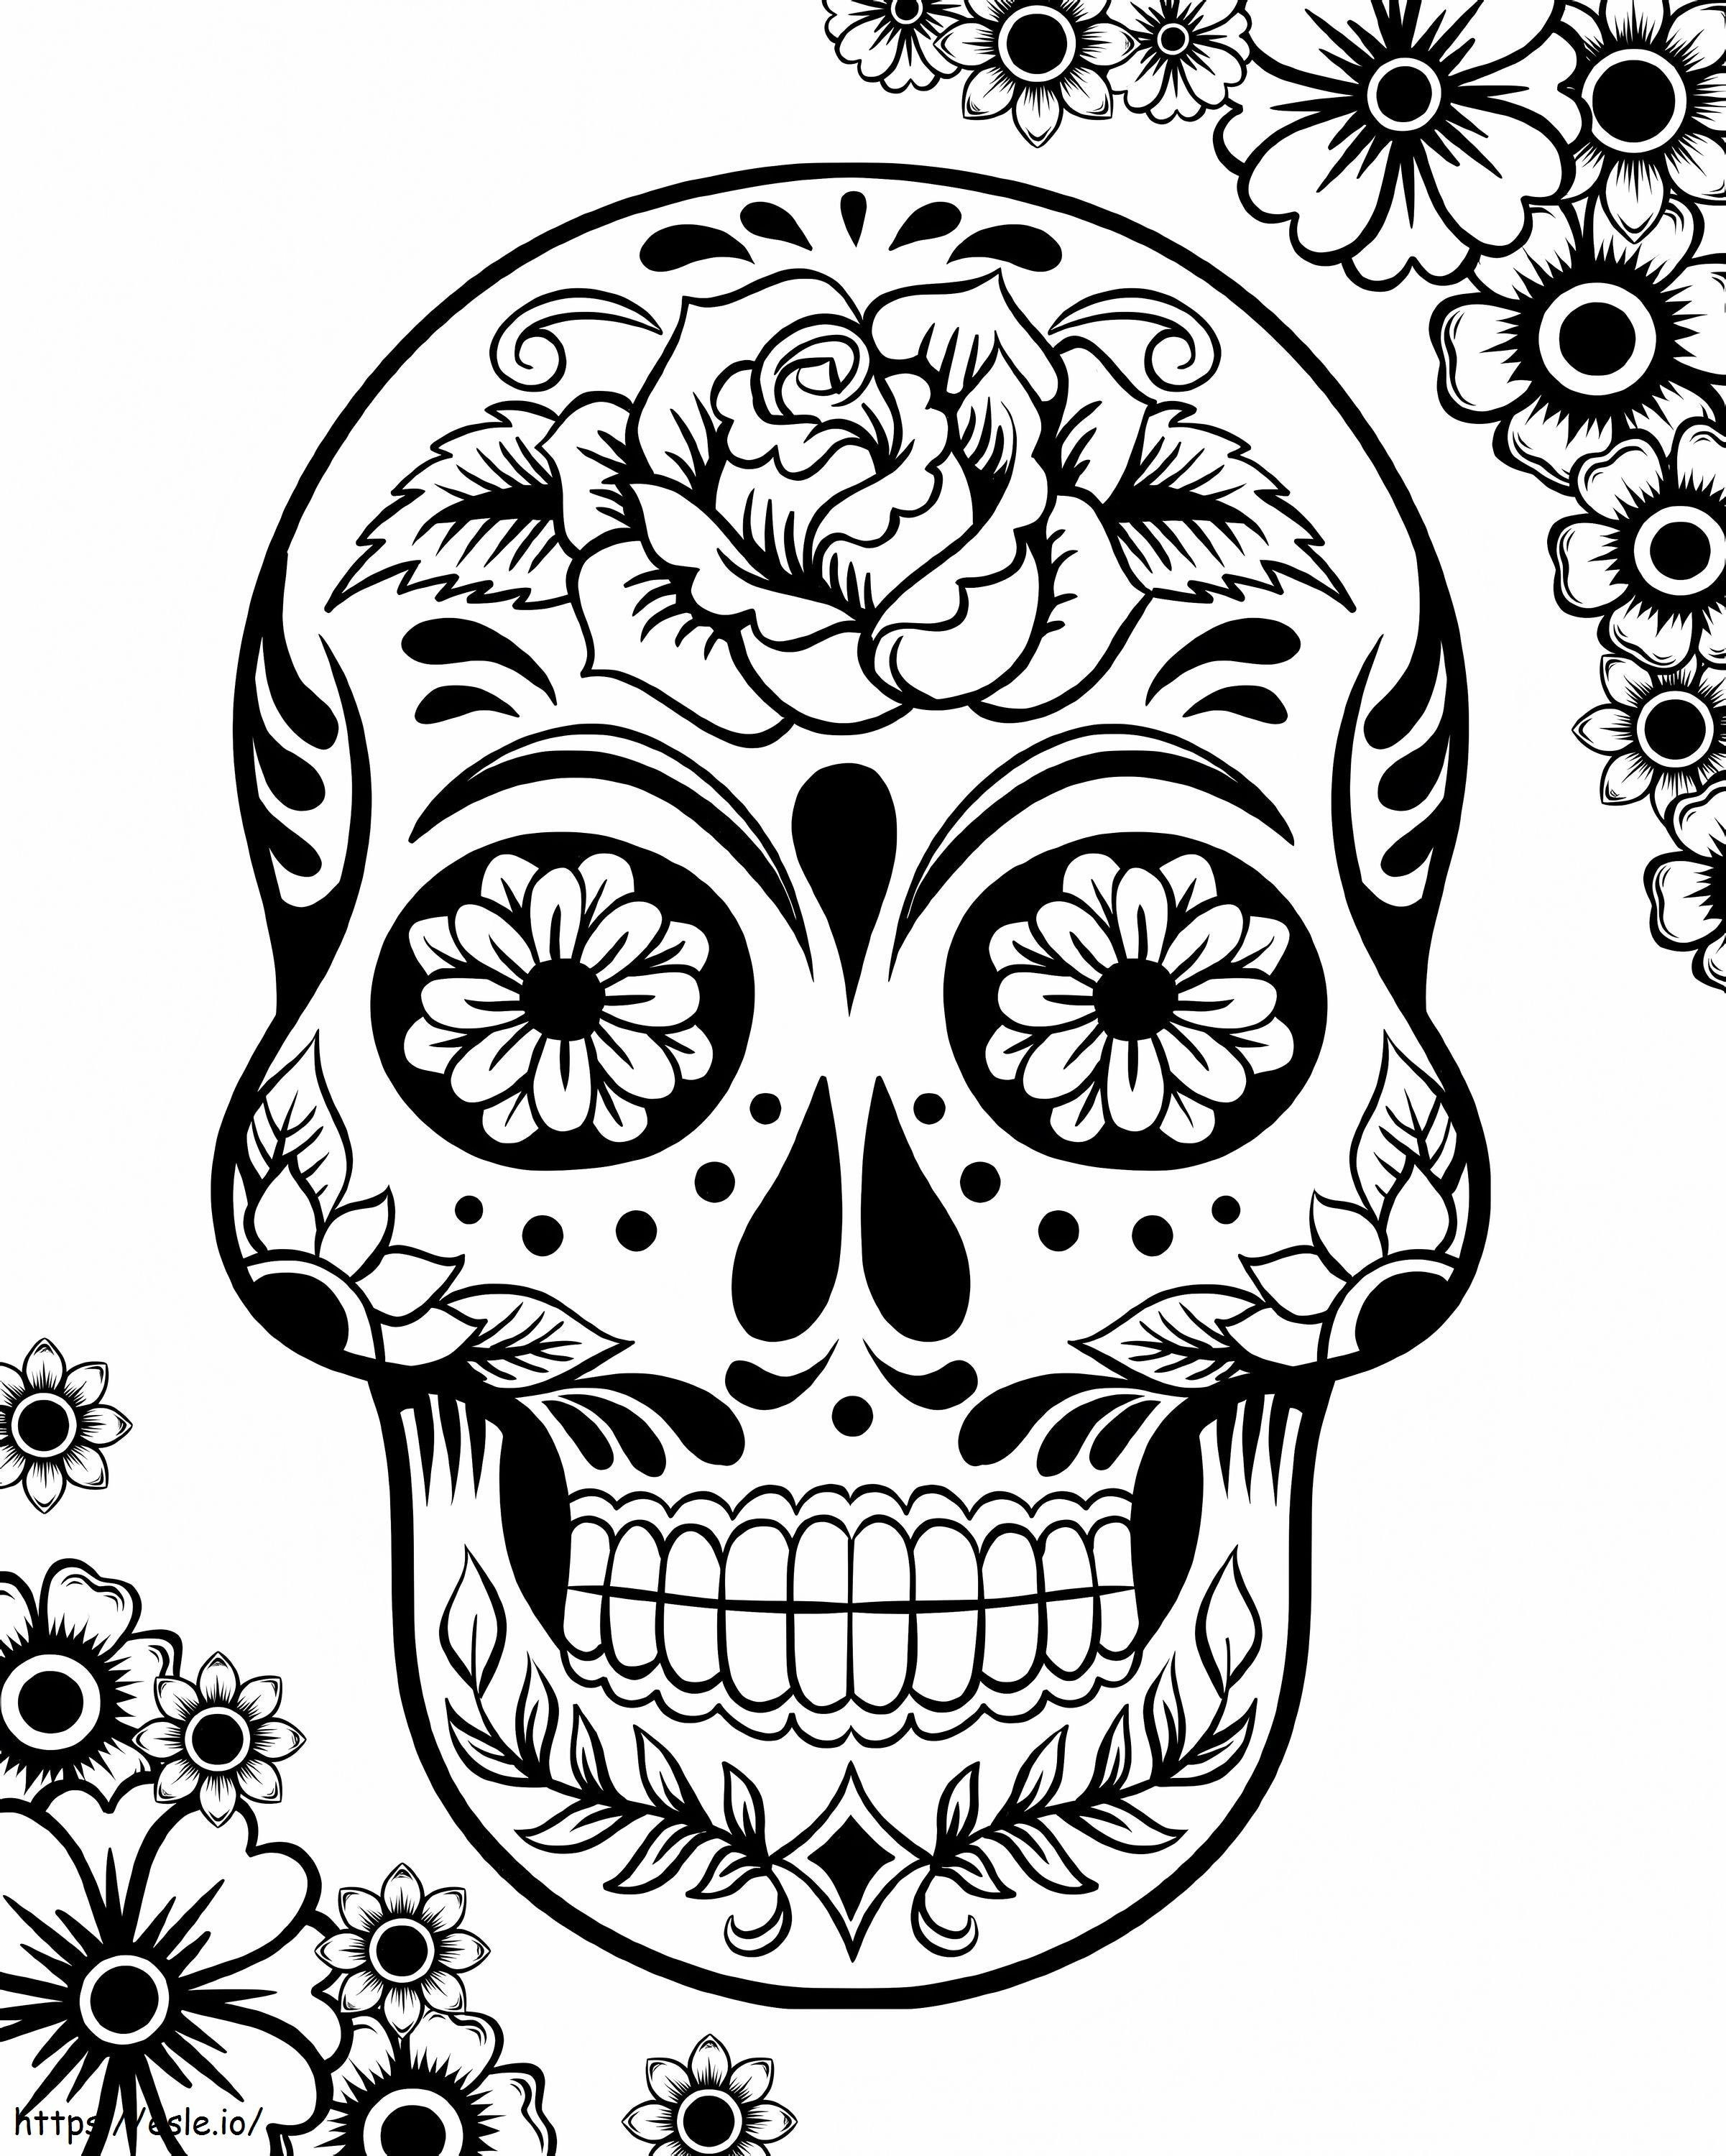 1578452262 Coloring Book Free Sugar Skull Pages For Adults Image Inspirations Page Kids Best coloring page